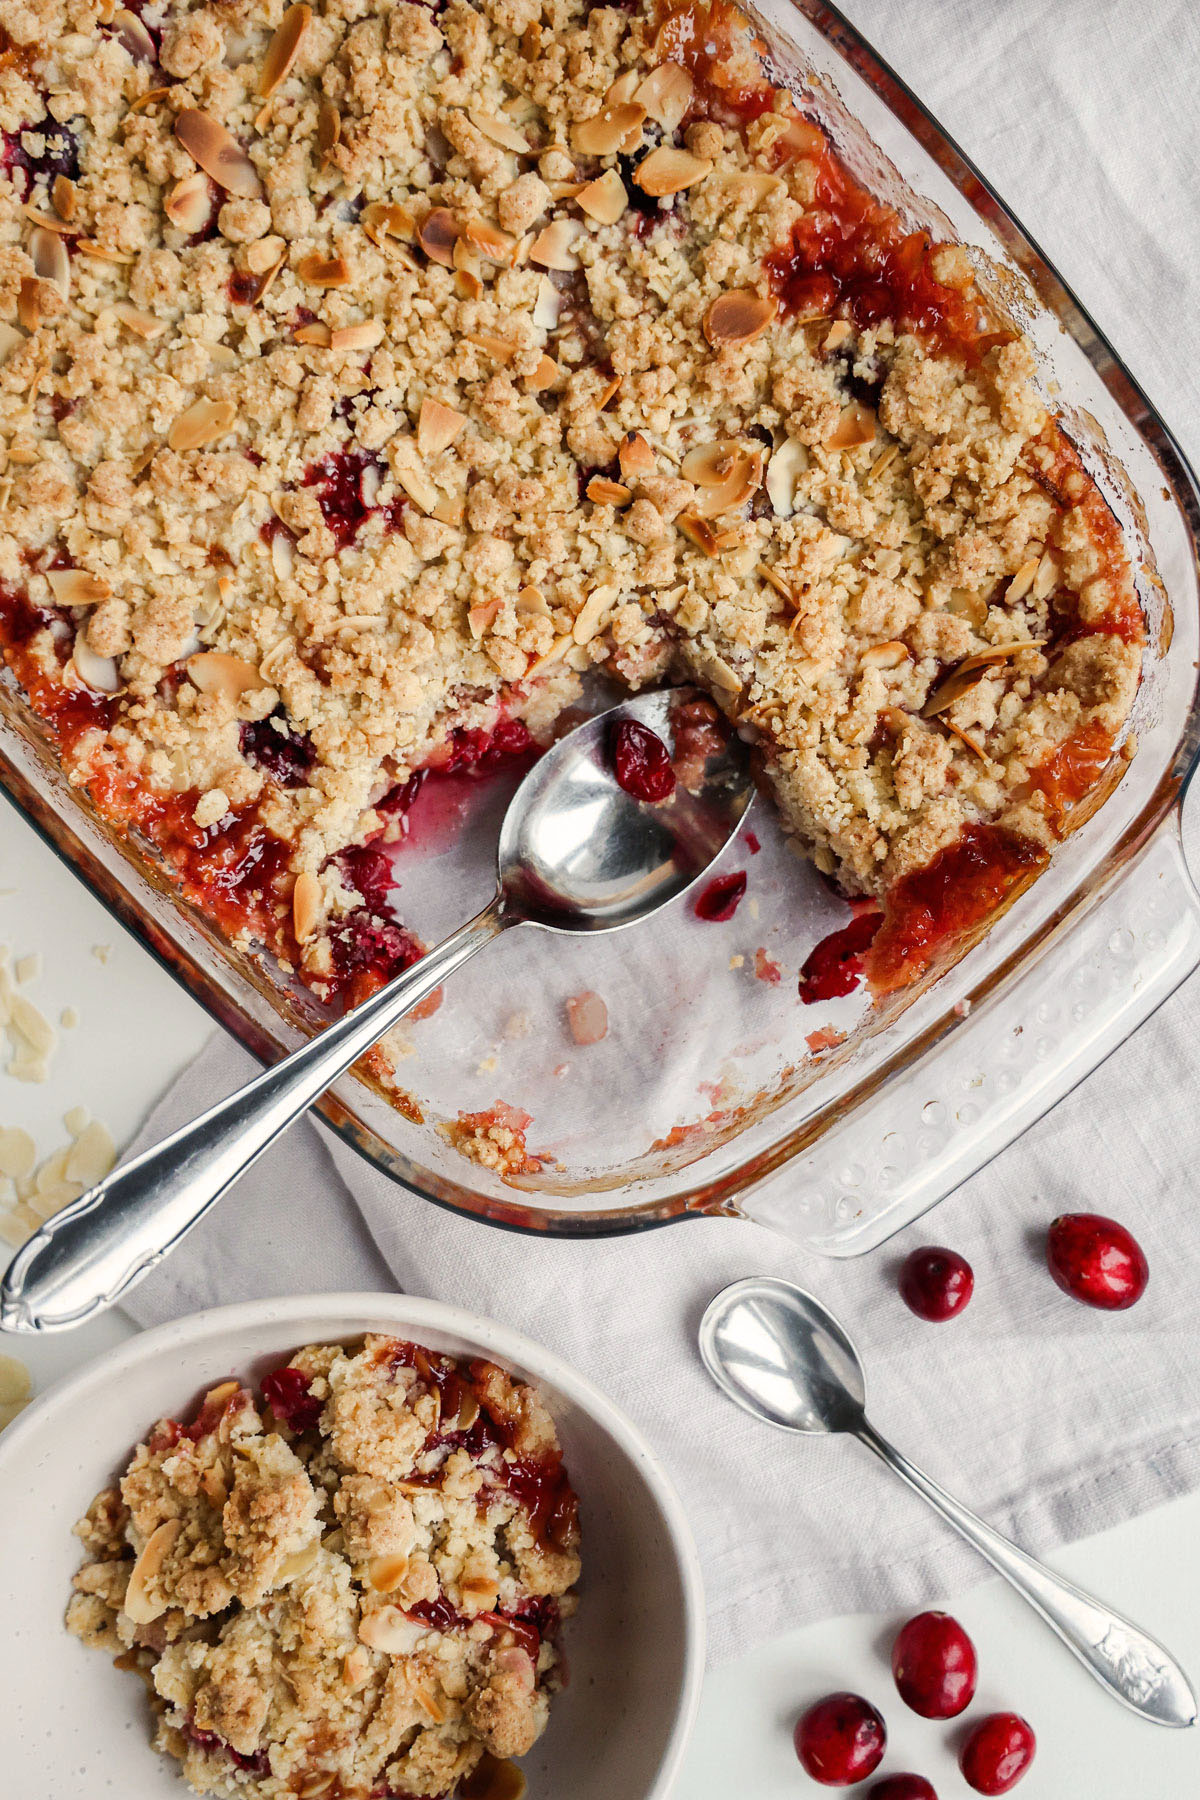 Christmas crumble with apples and cranberries.